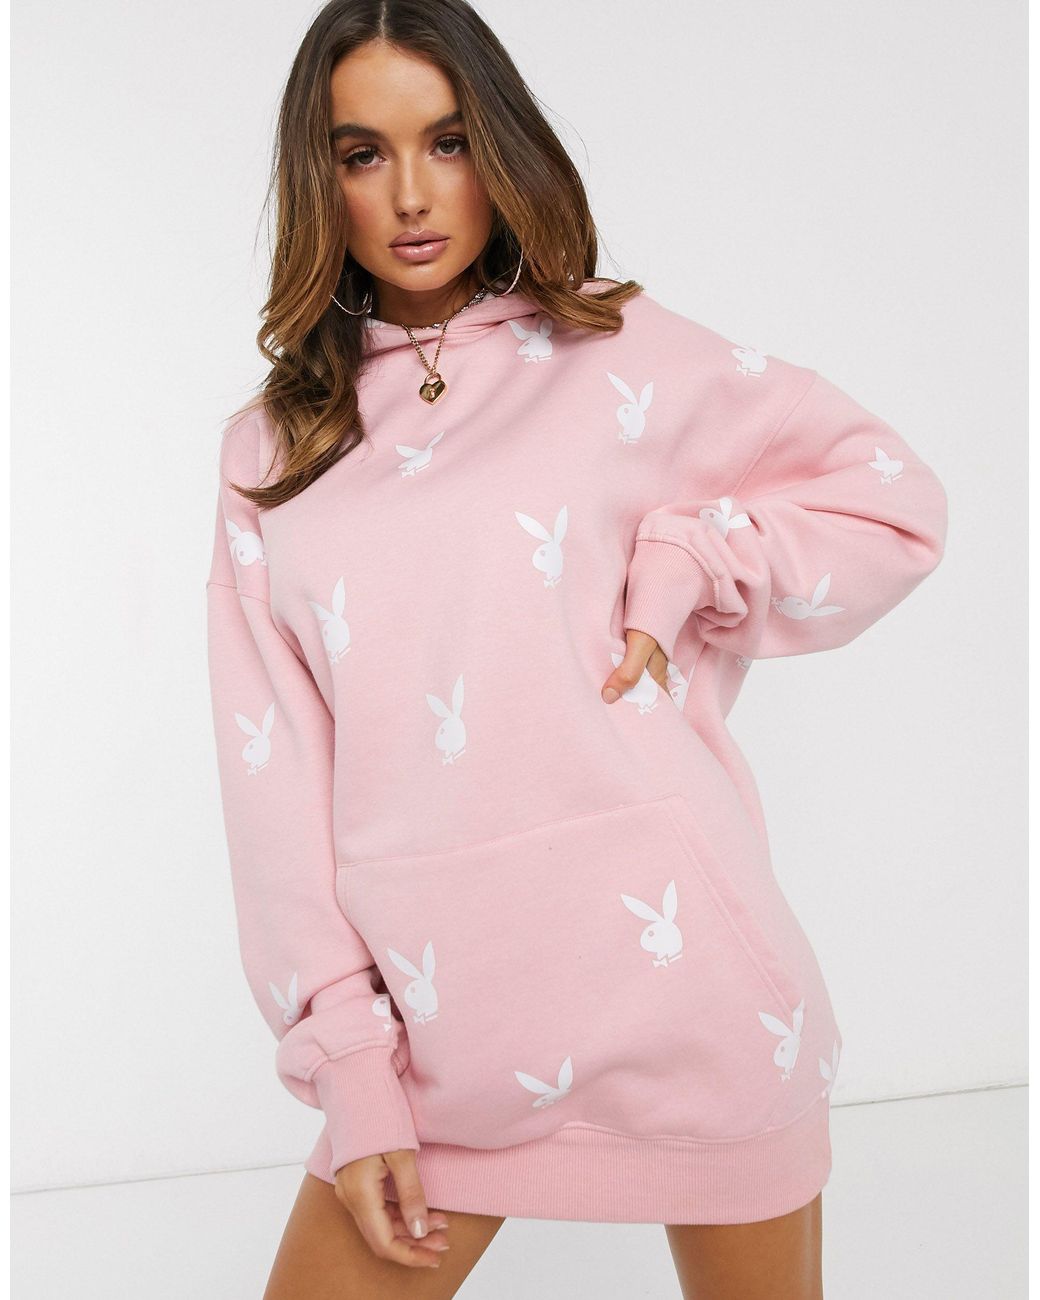 Missguided Playboy X Extreme Oversized Repeat Print Hoodie Dress in Pink |  Lyst